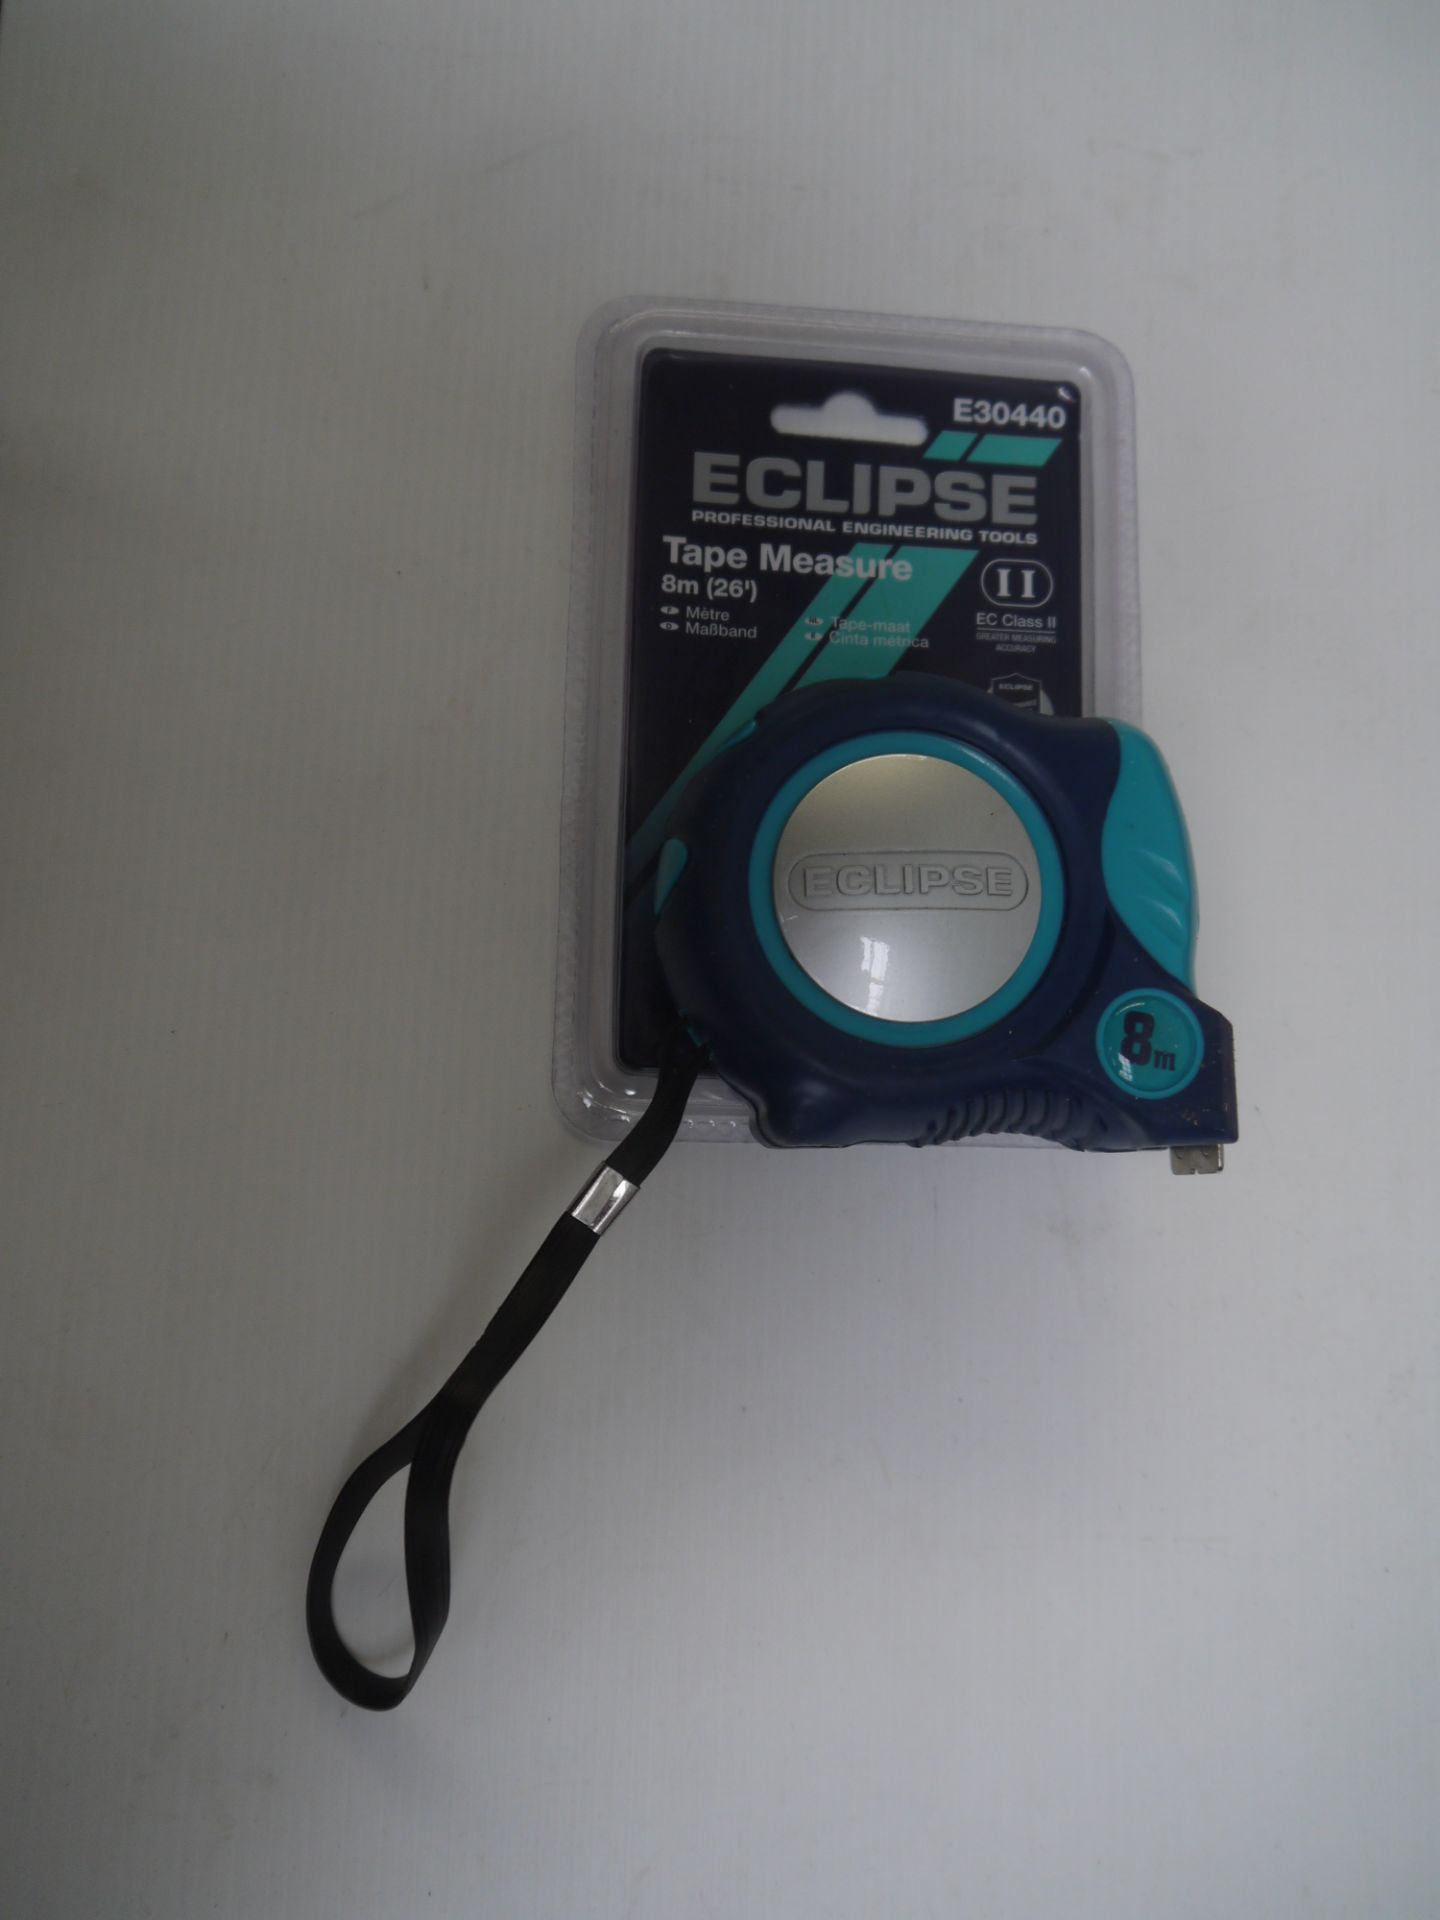 Eclipse 8mtr Tape Measure new still attached to packaging